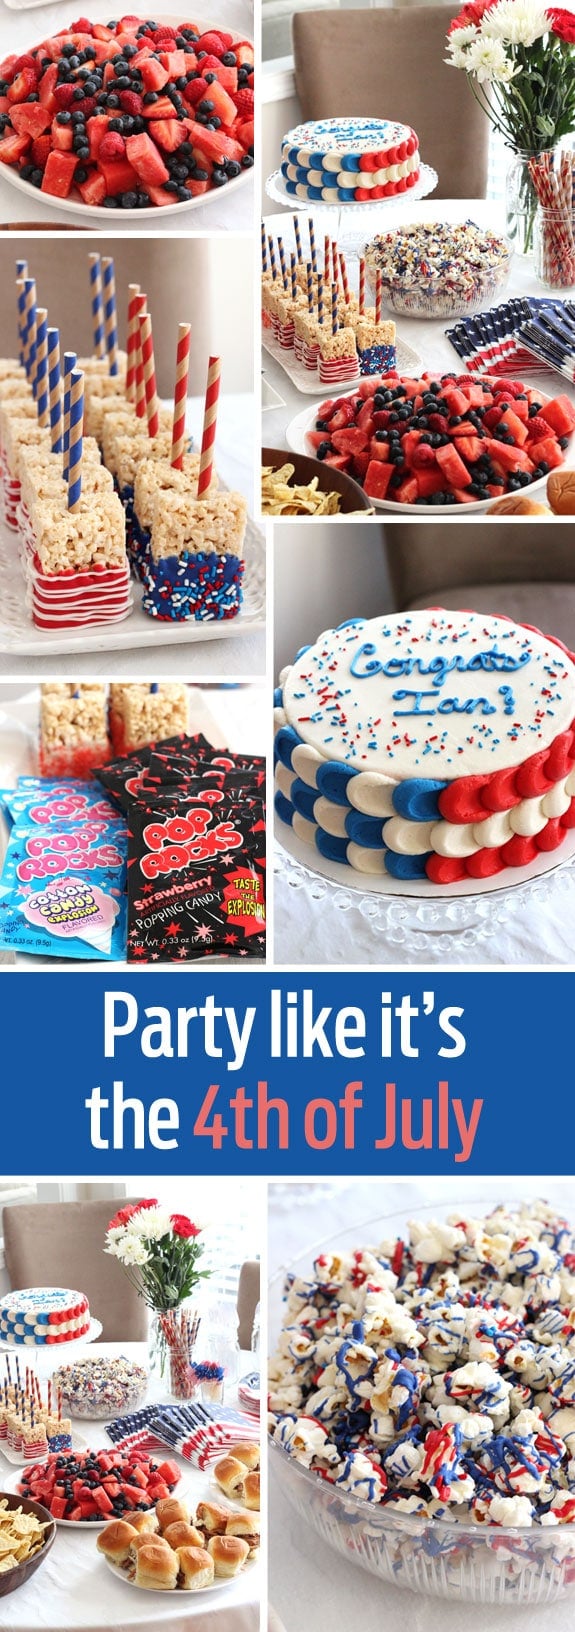 Collage of Seven Festive 4th of July Party Treats